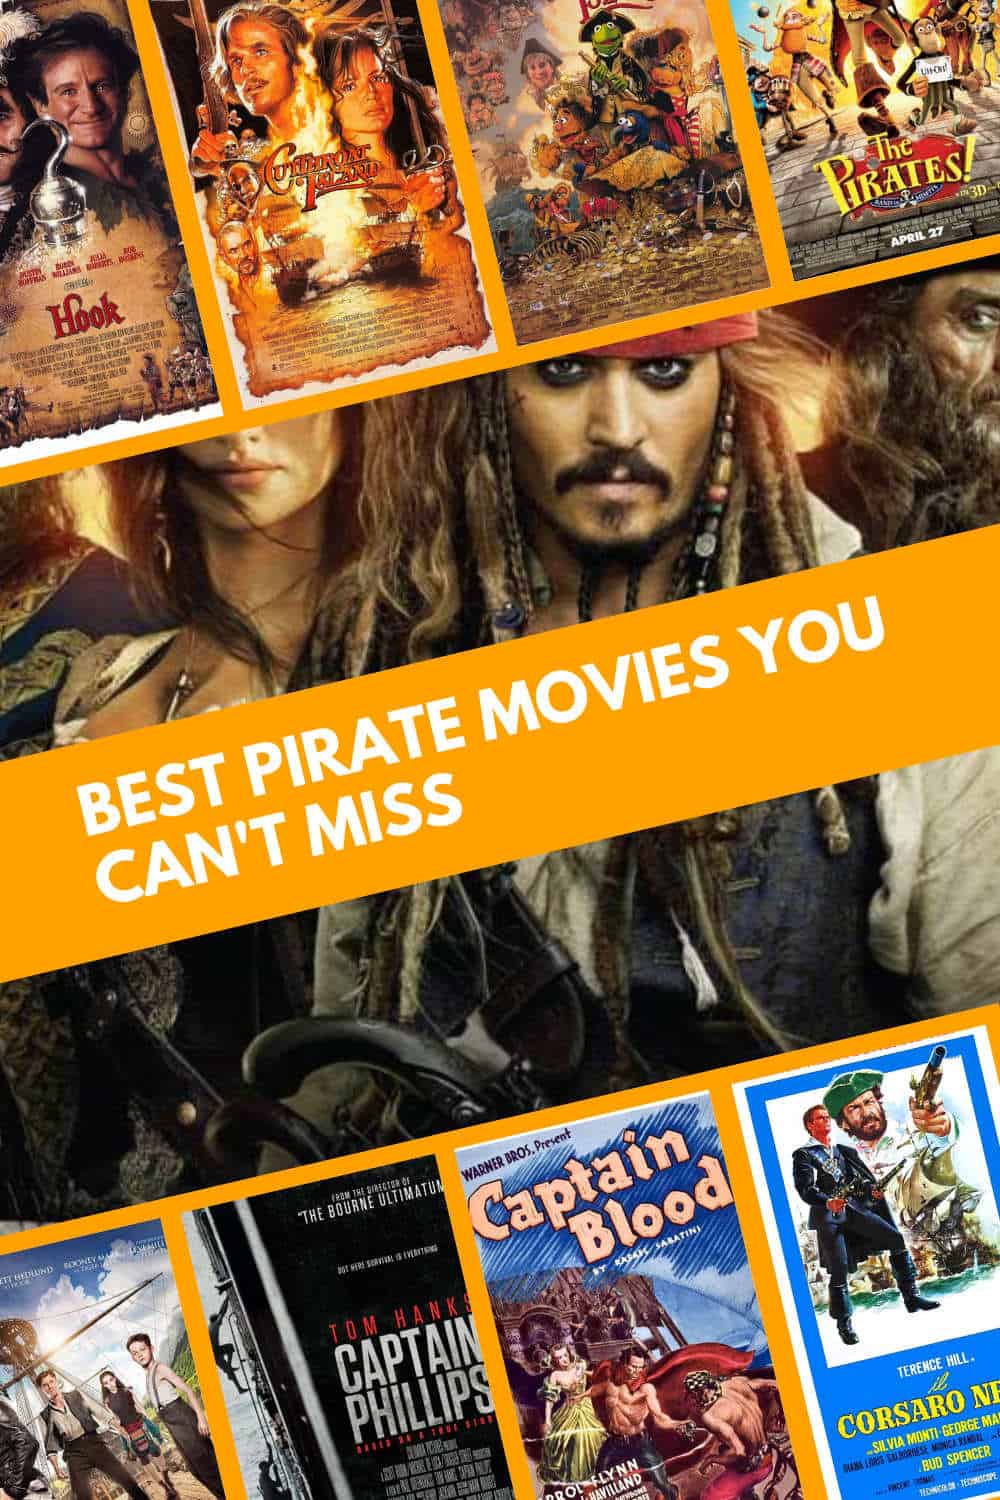 Pirate Movie You Can't Miss